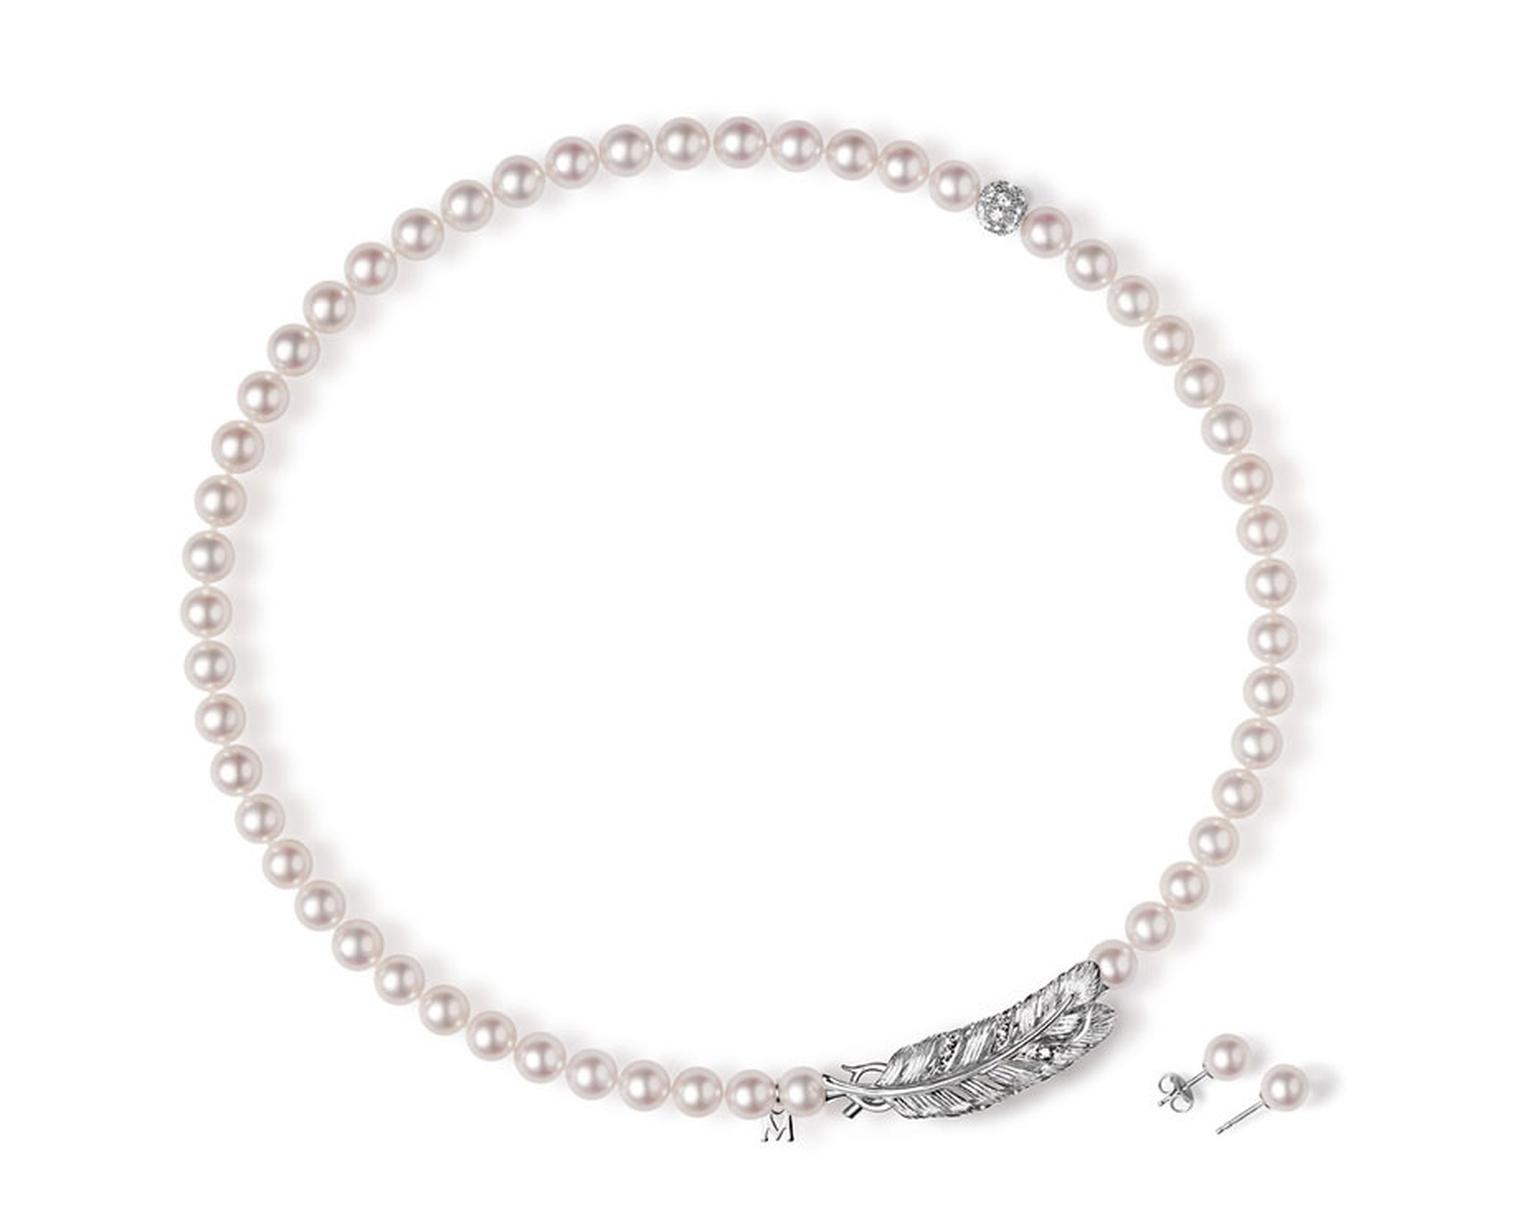 Mikimoto Debutante 2011 Strand necklace and stuf earrings set Akoya pearls, diamonds and white gold 5,900 MAIN-PIC